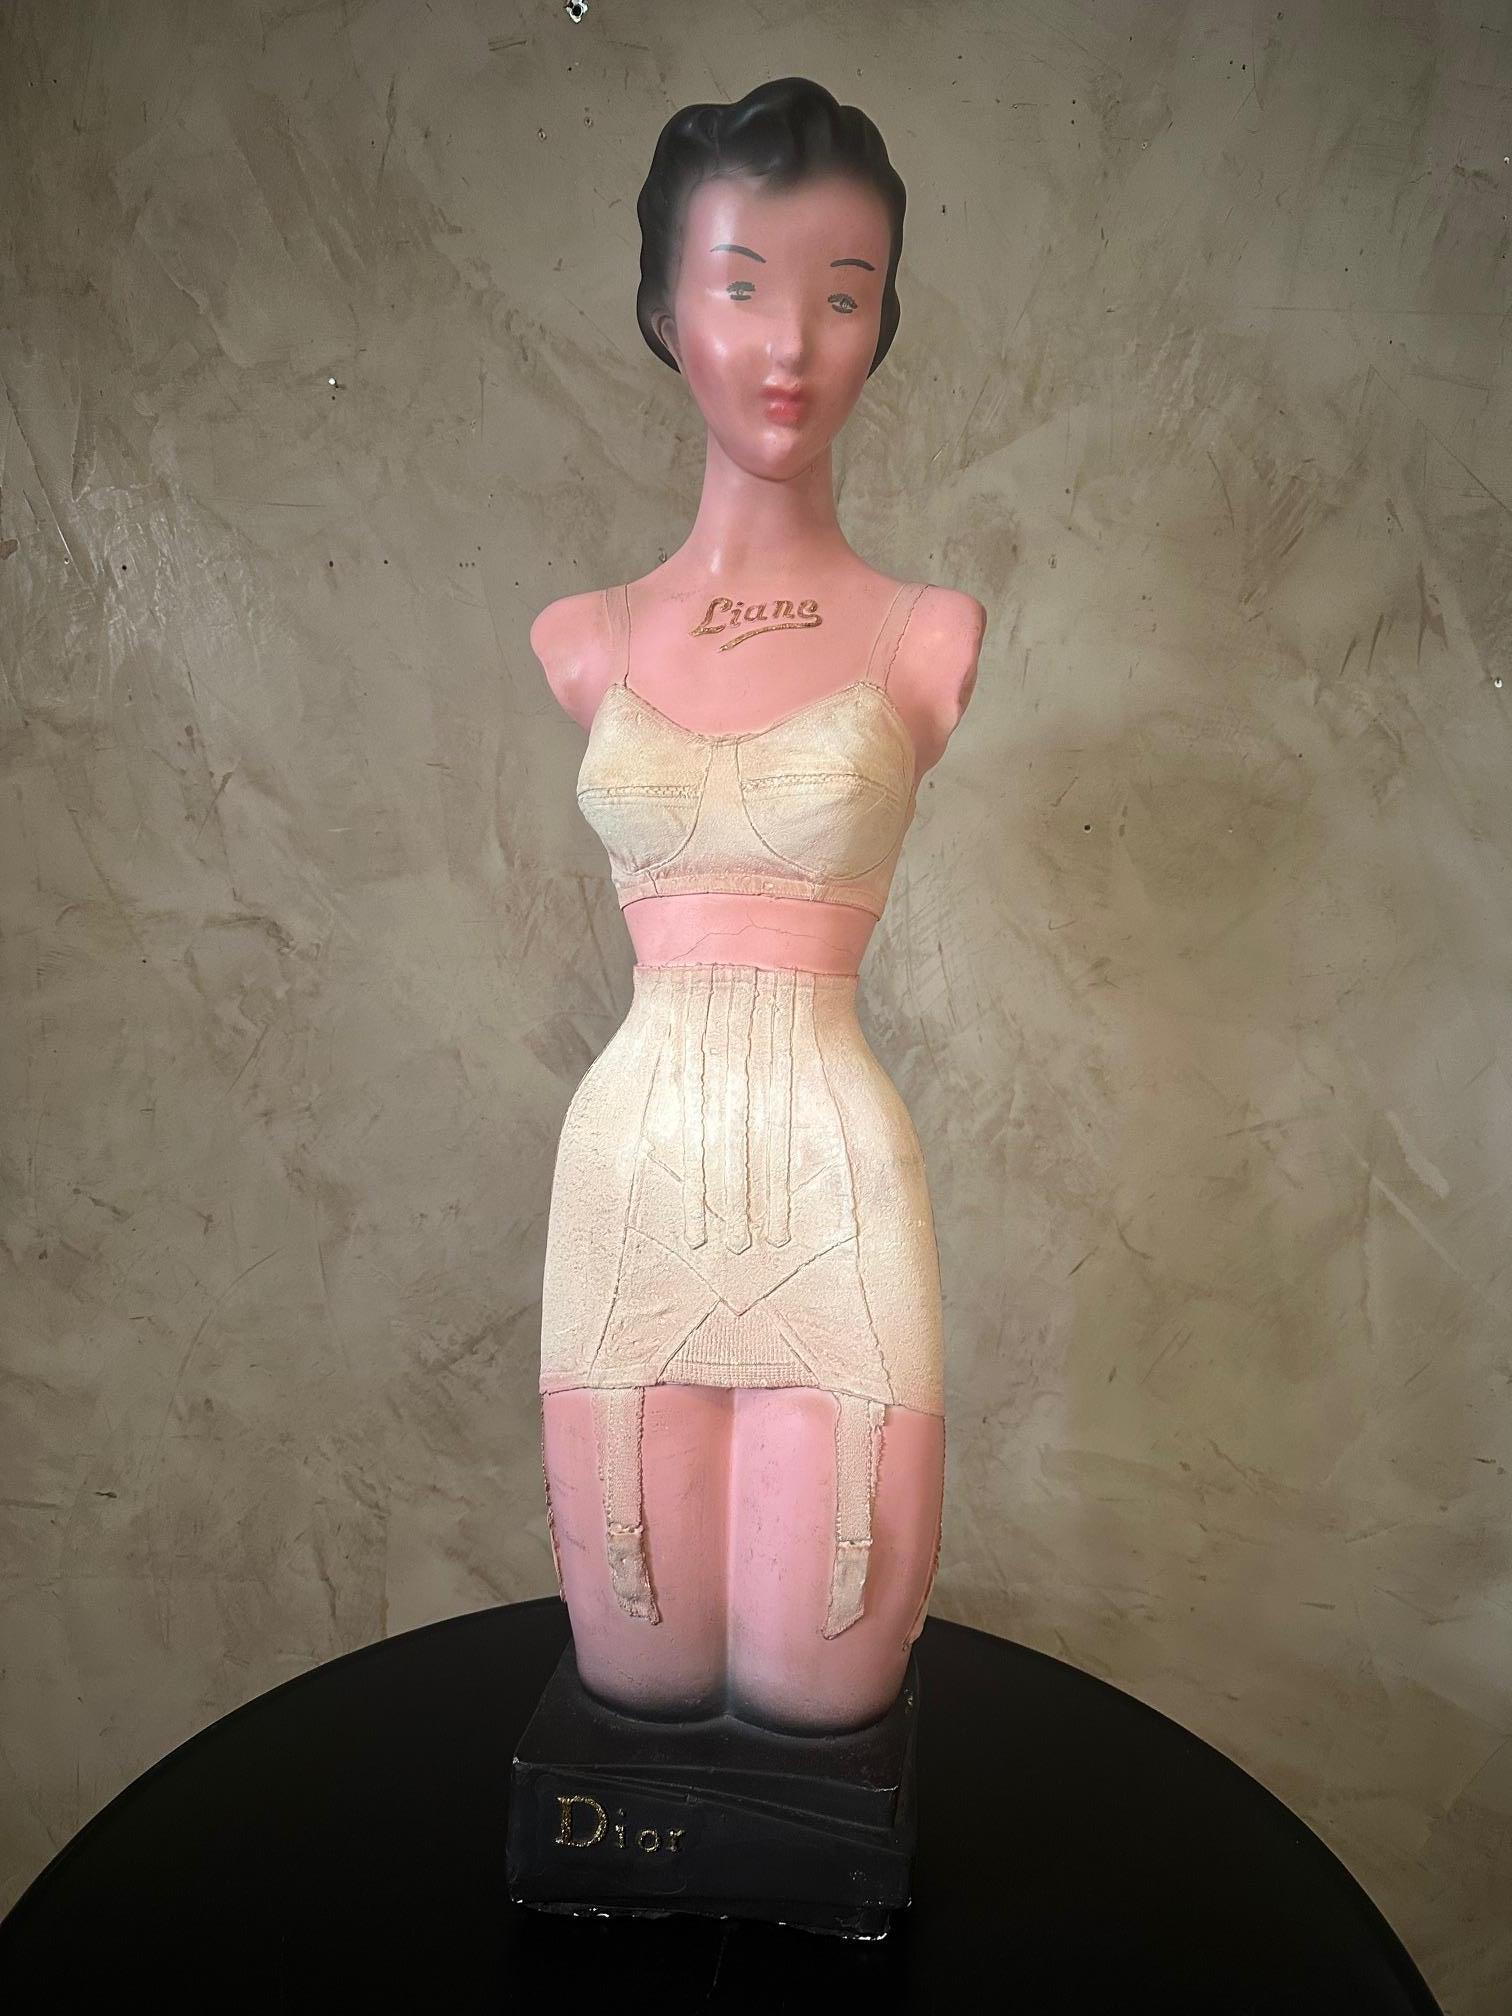 Very nice vintage 20th century Plaster made in the 1950s as an advertisement for the lingerie Liane for DIOR. 
Good condition for its age. 